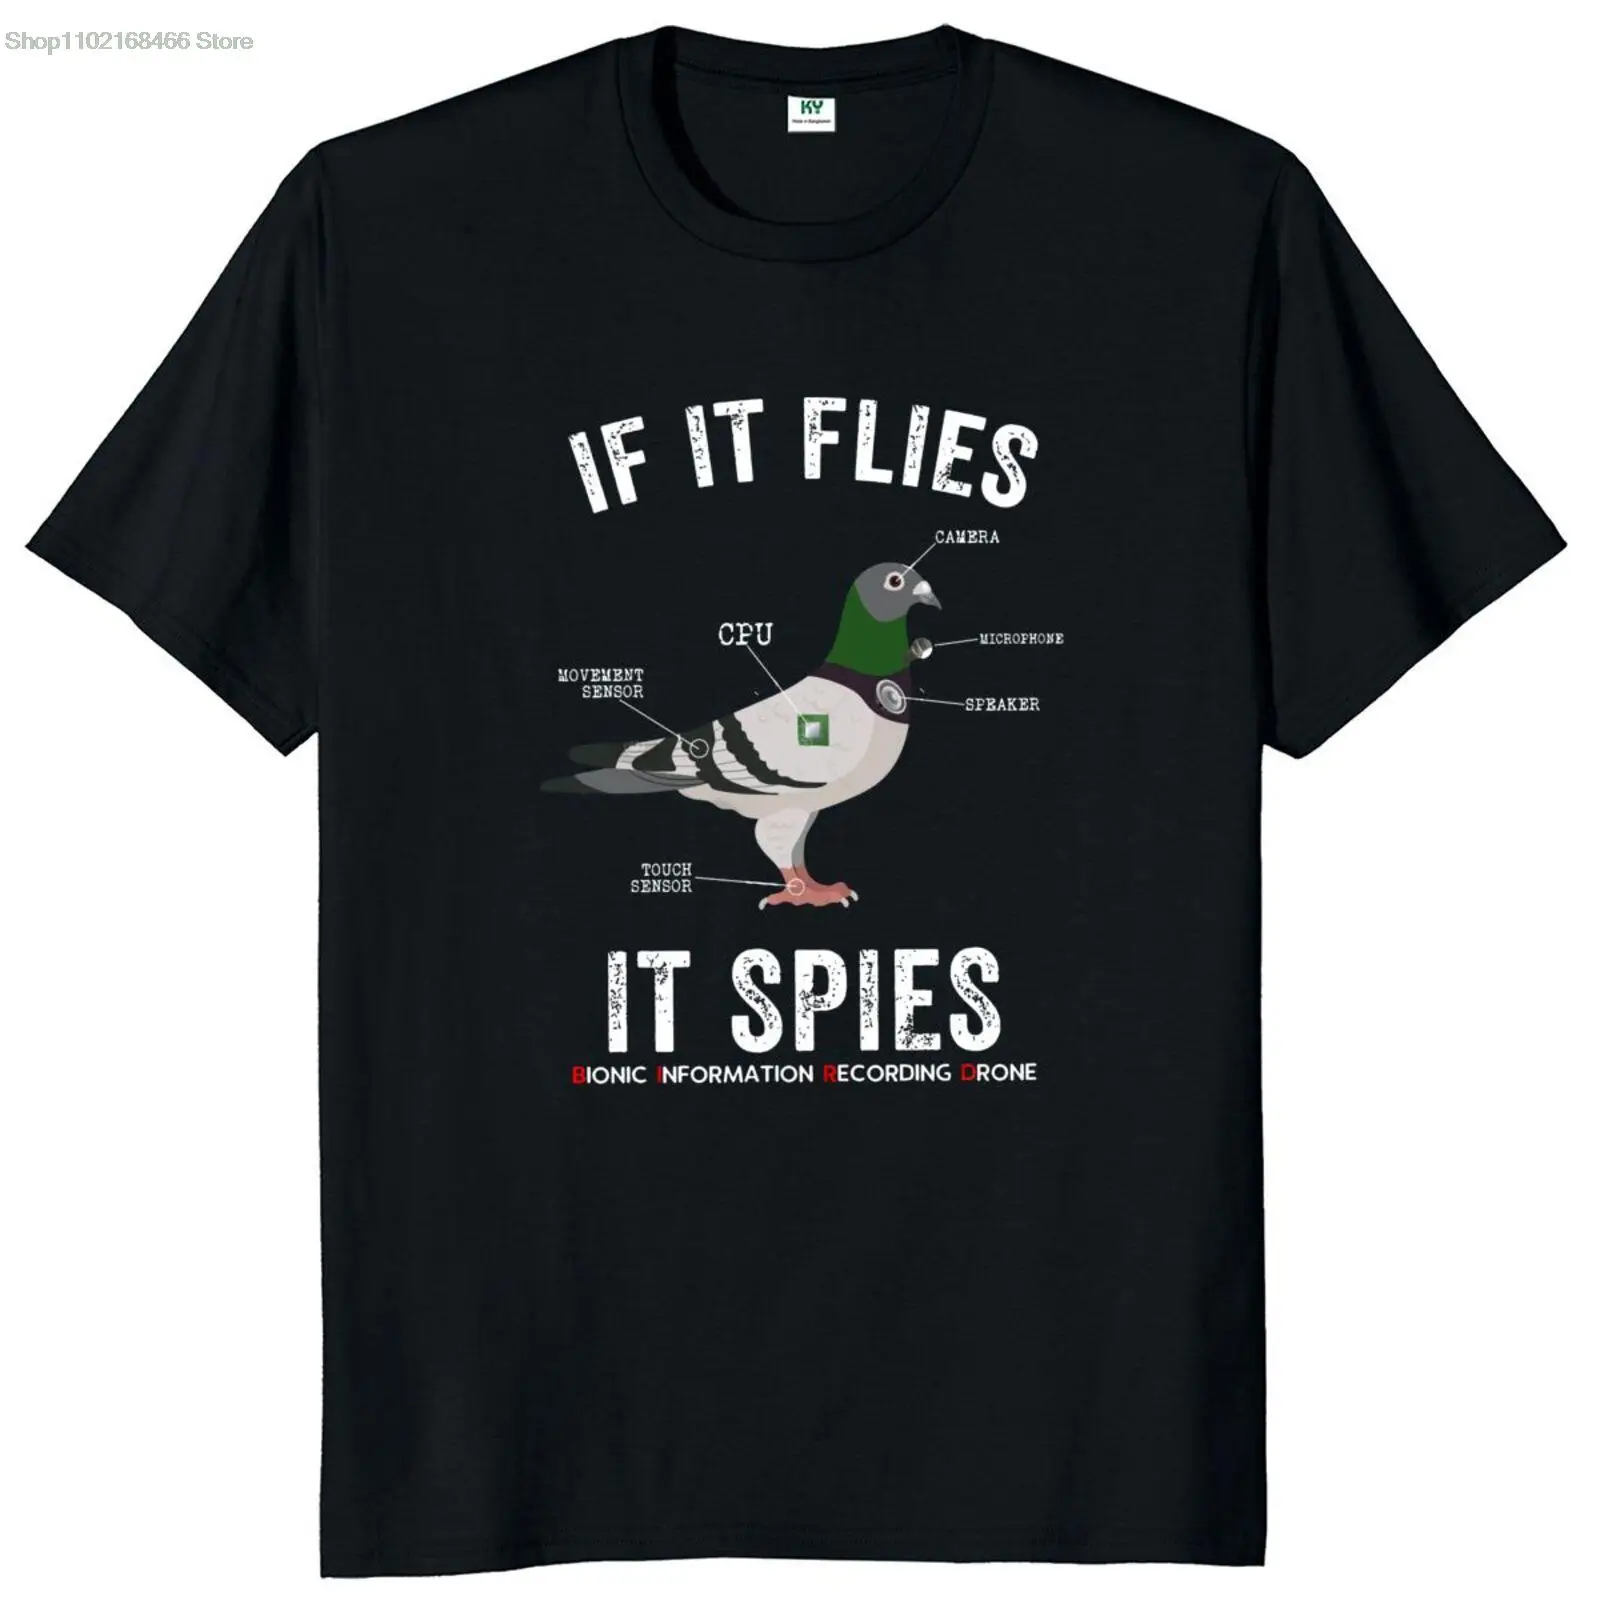 

If It Flies It Spies Birds Are Not Real T Shirt Funny Nerd Drone Conspiracy Theory Classic Tshirts 100% Cotton For Unisex